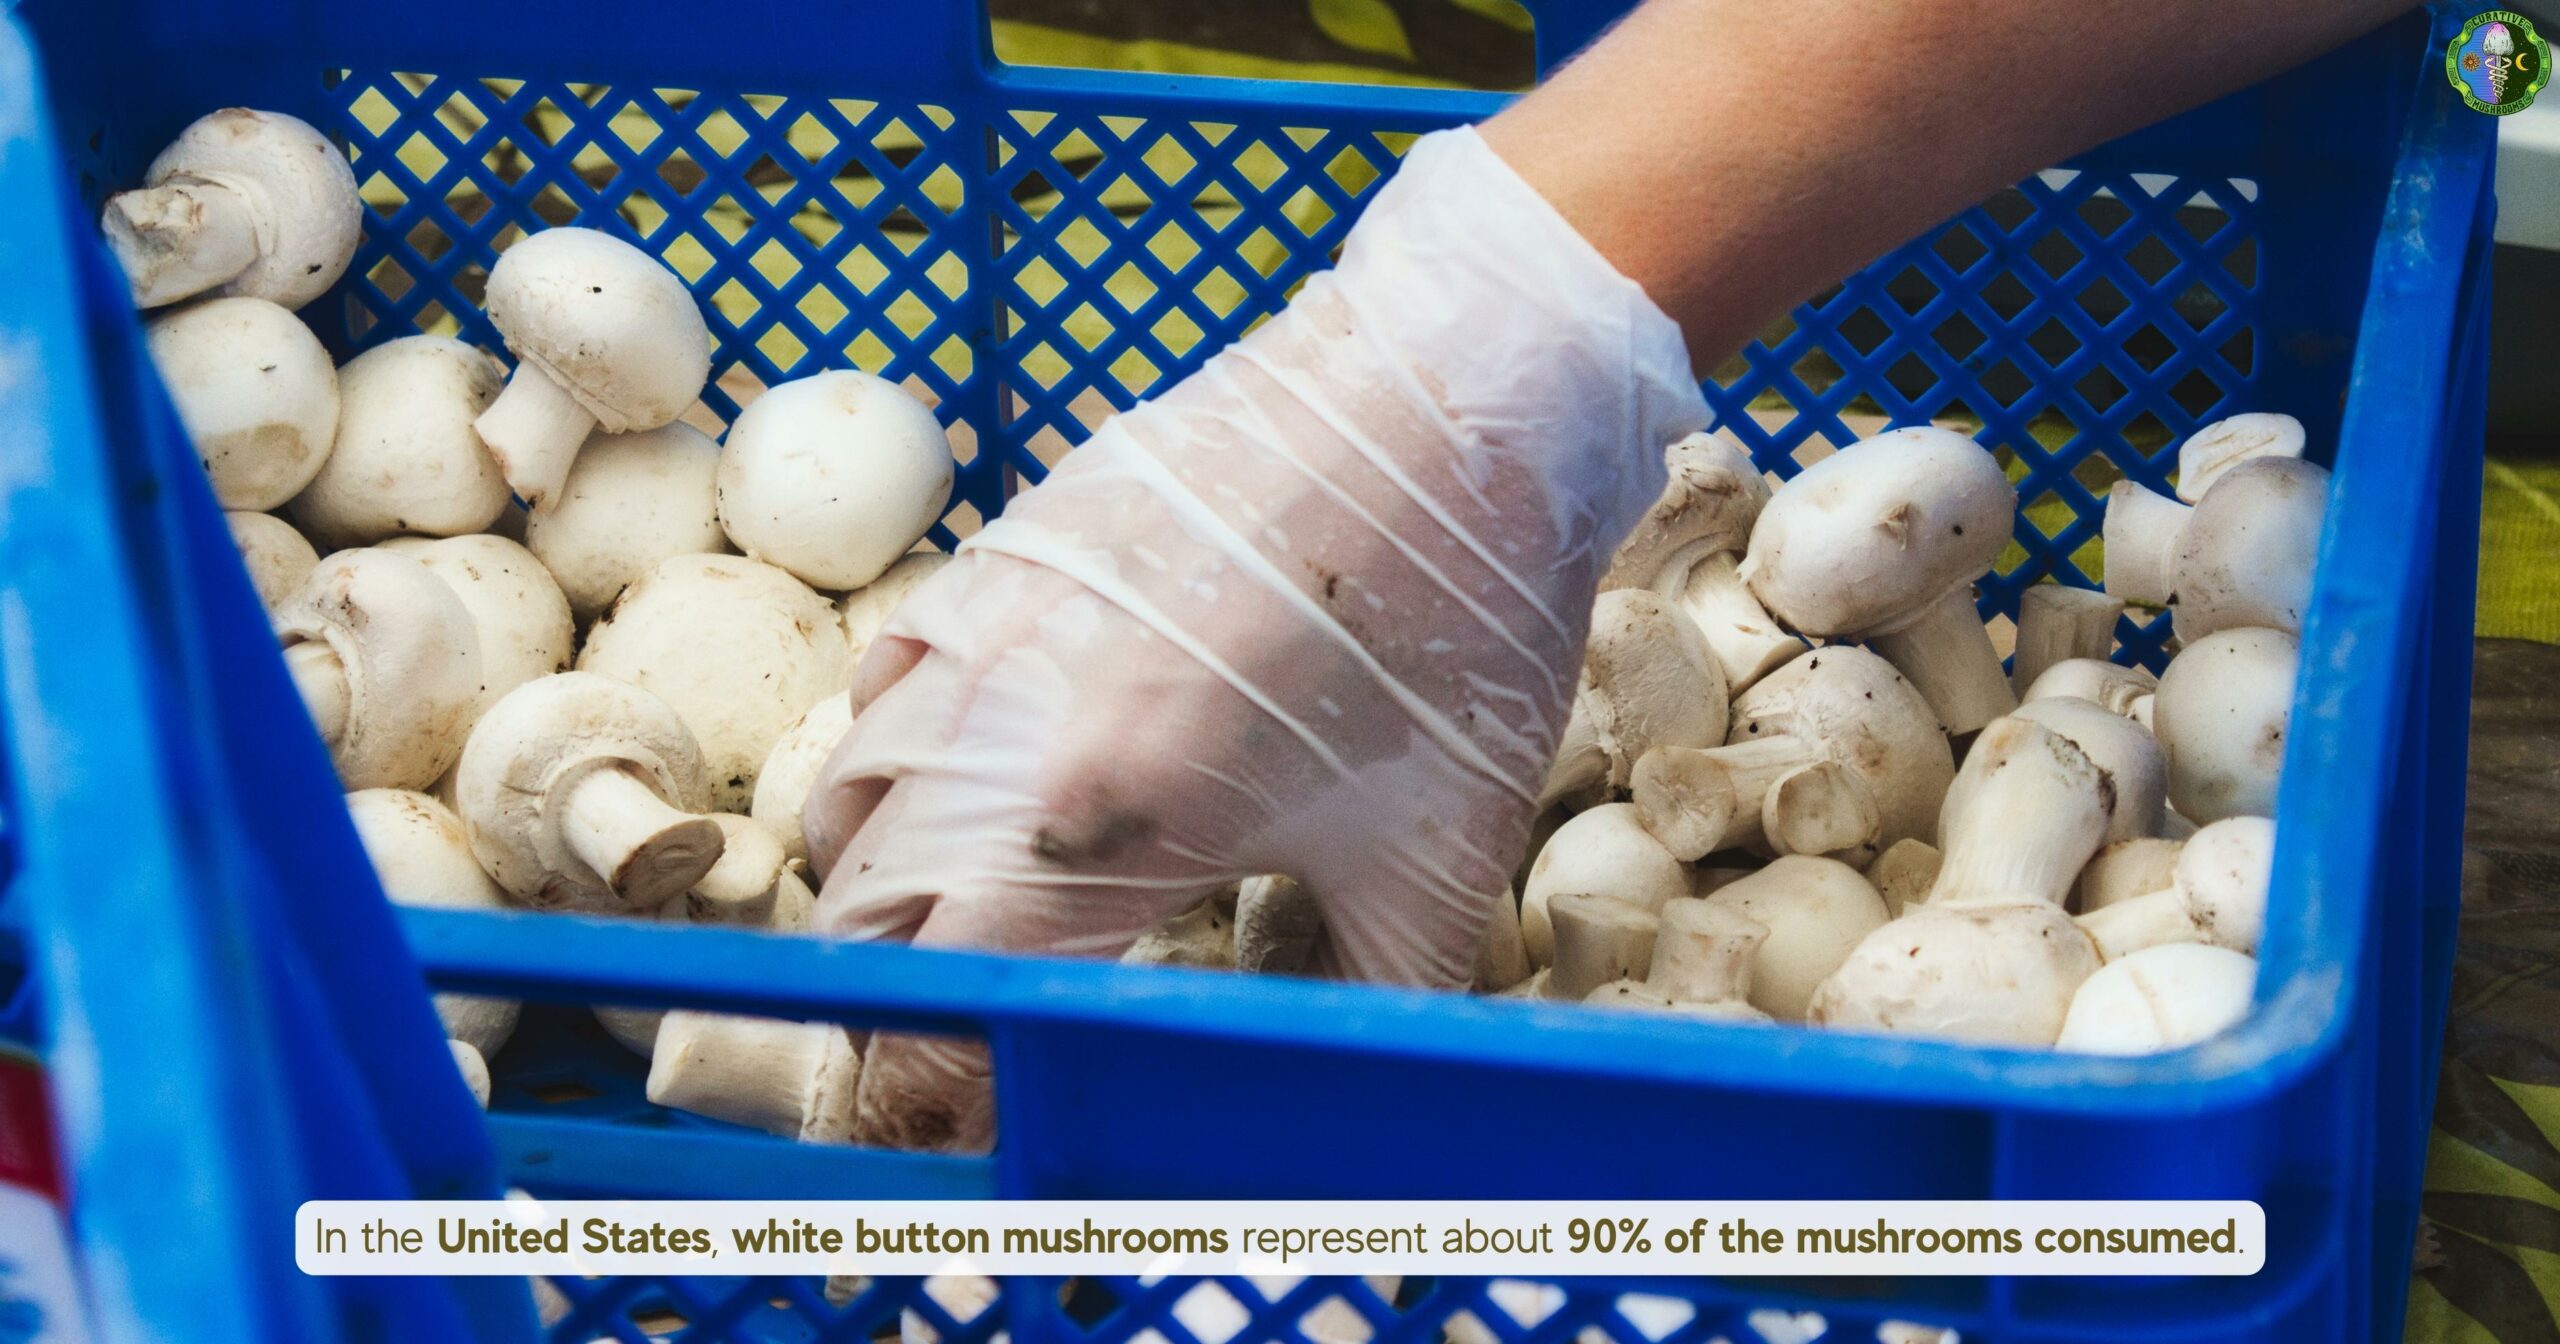 What are white button mushrooms - youngest life stage of Agaricus bisporus - 90% of the mushrooms consumed in United States